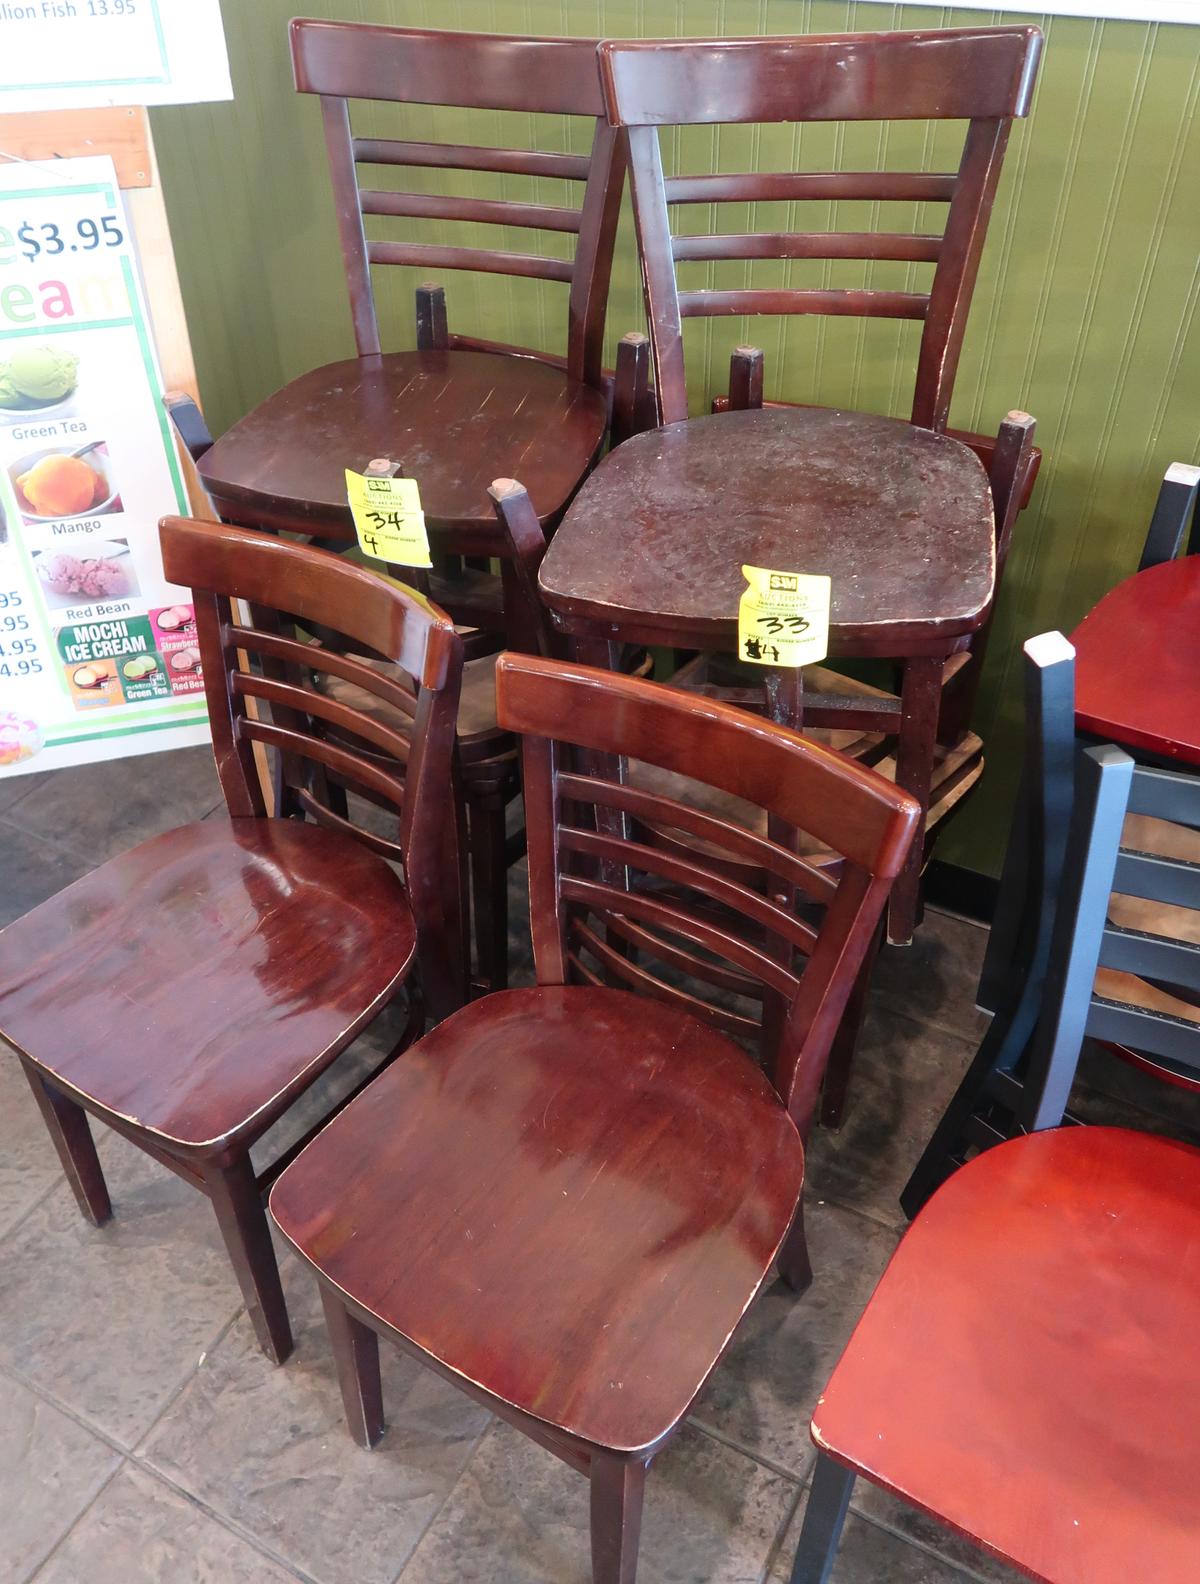 cafe chairs, wooden